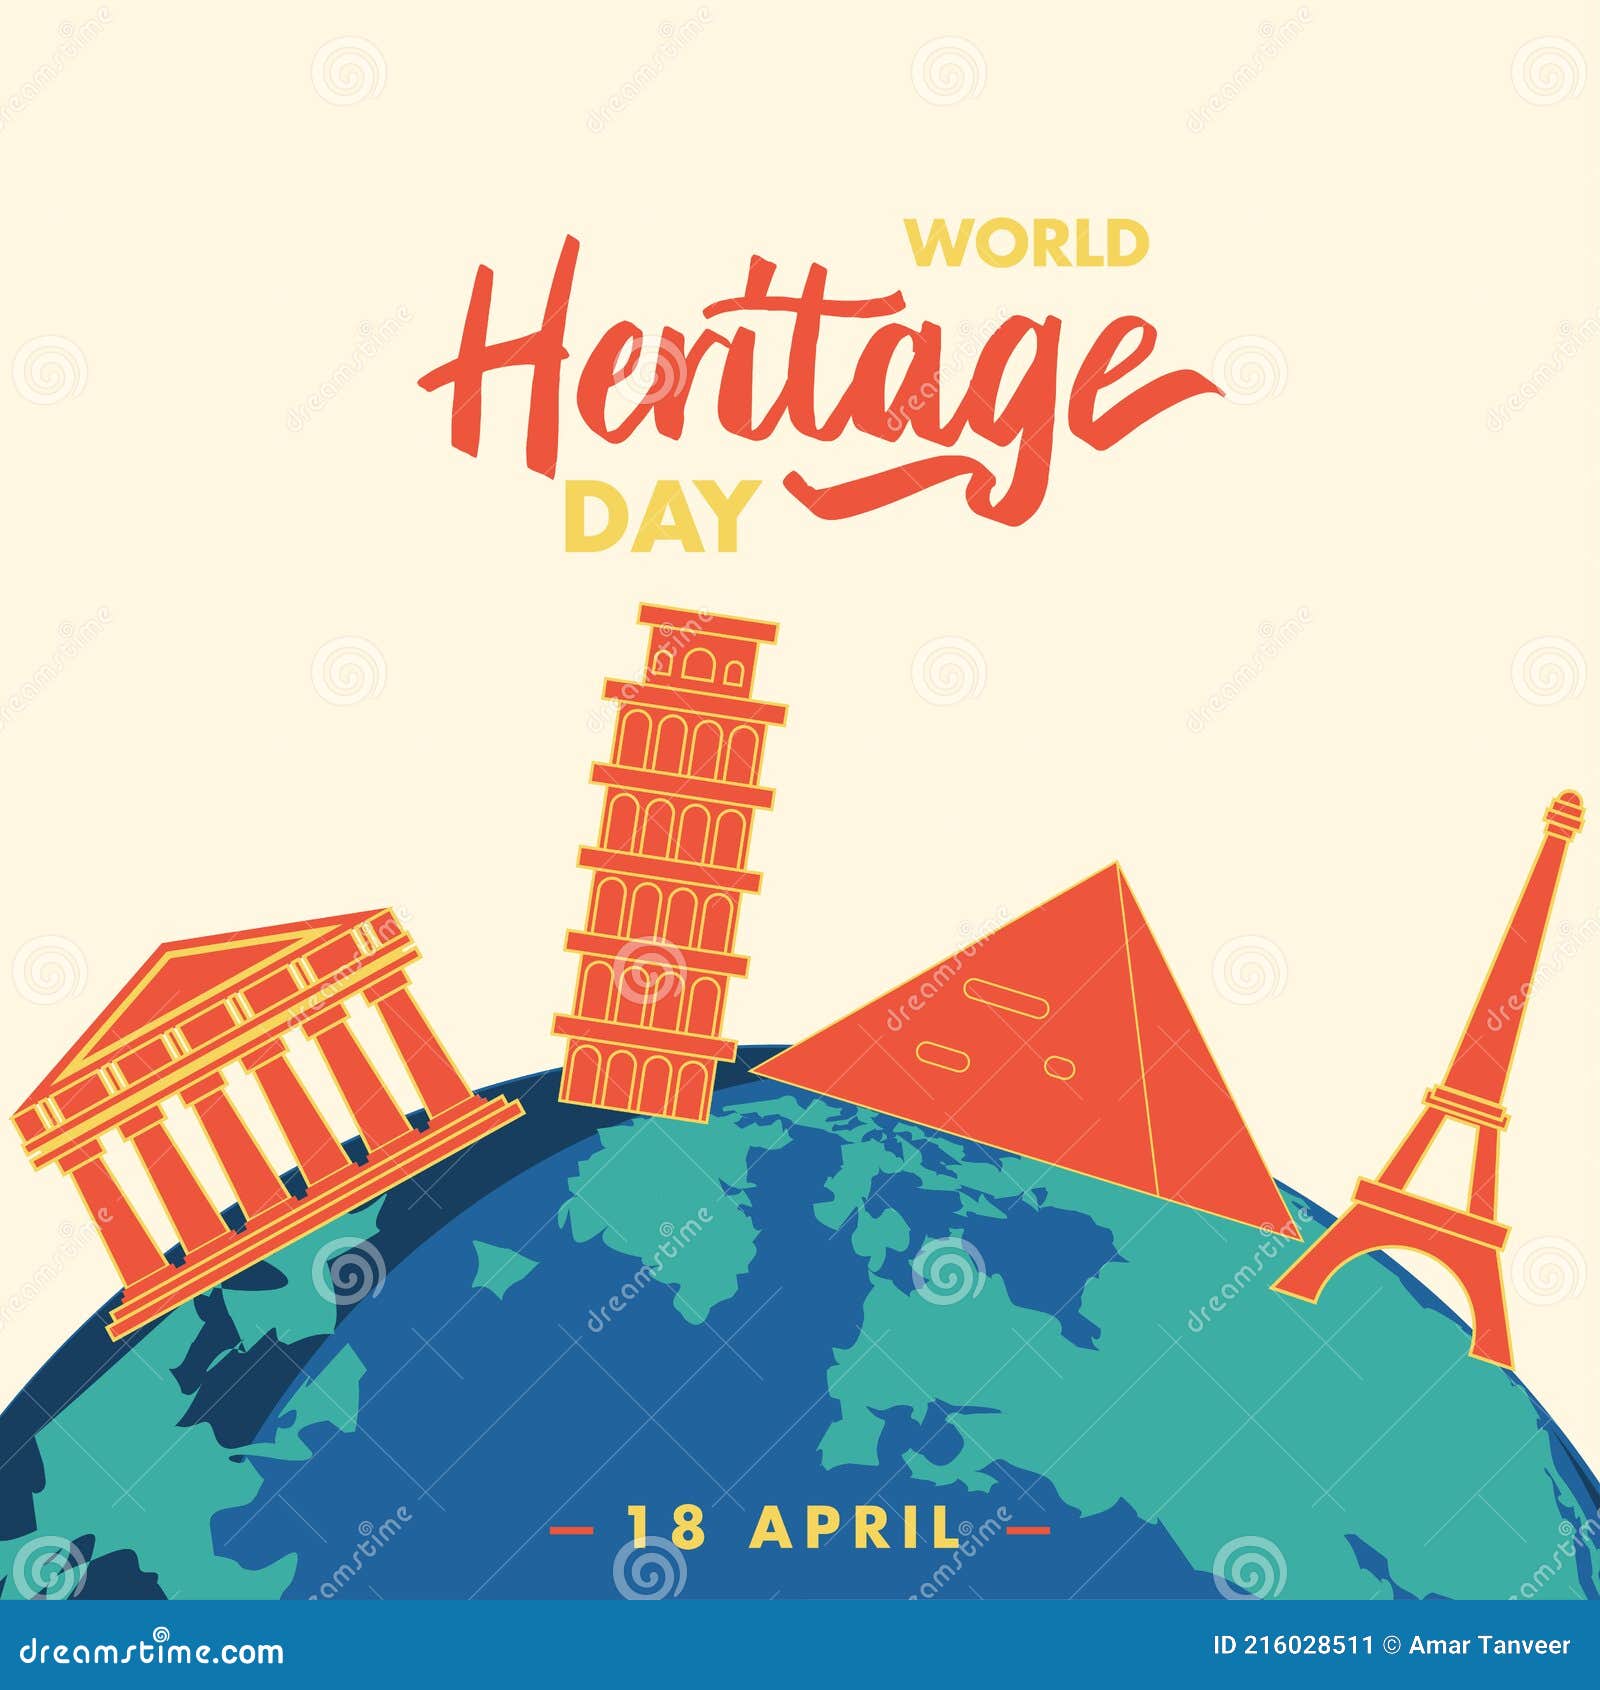 World Heritage Day 18 April Poster, Monuments Illustration Vector Stock